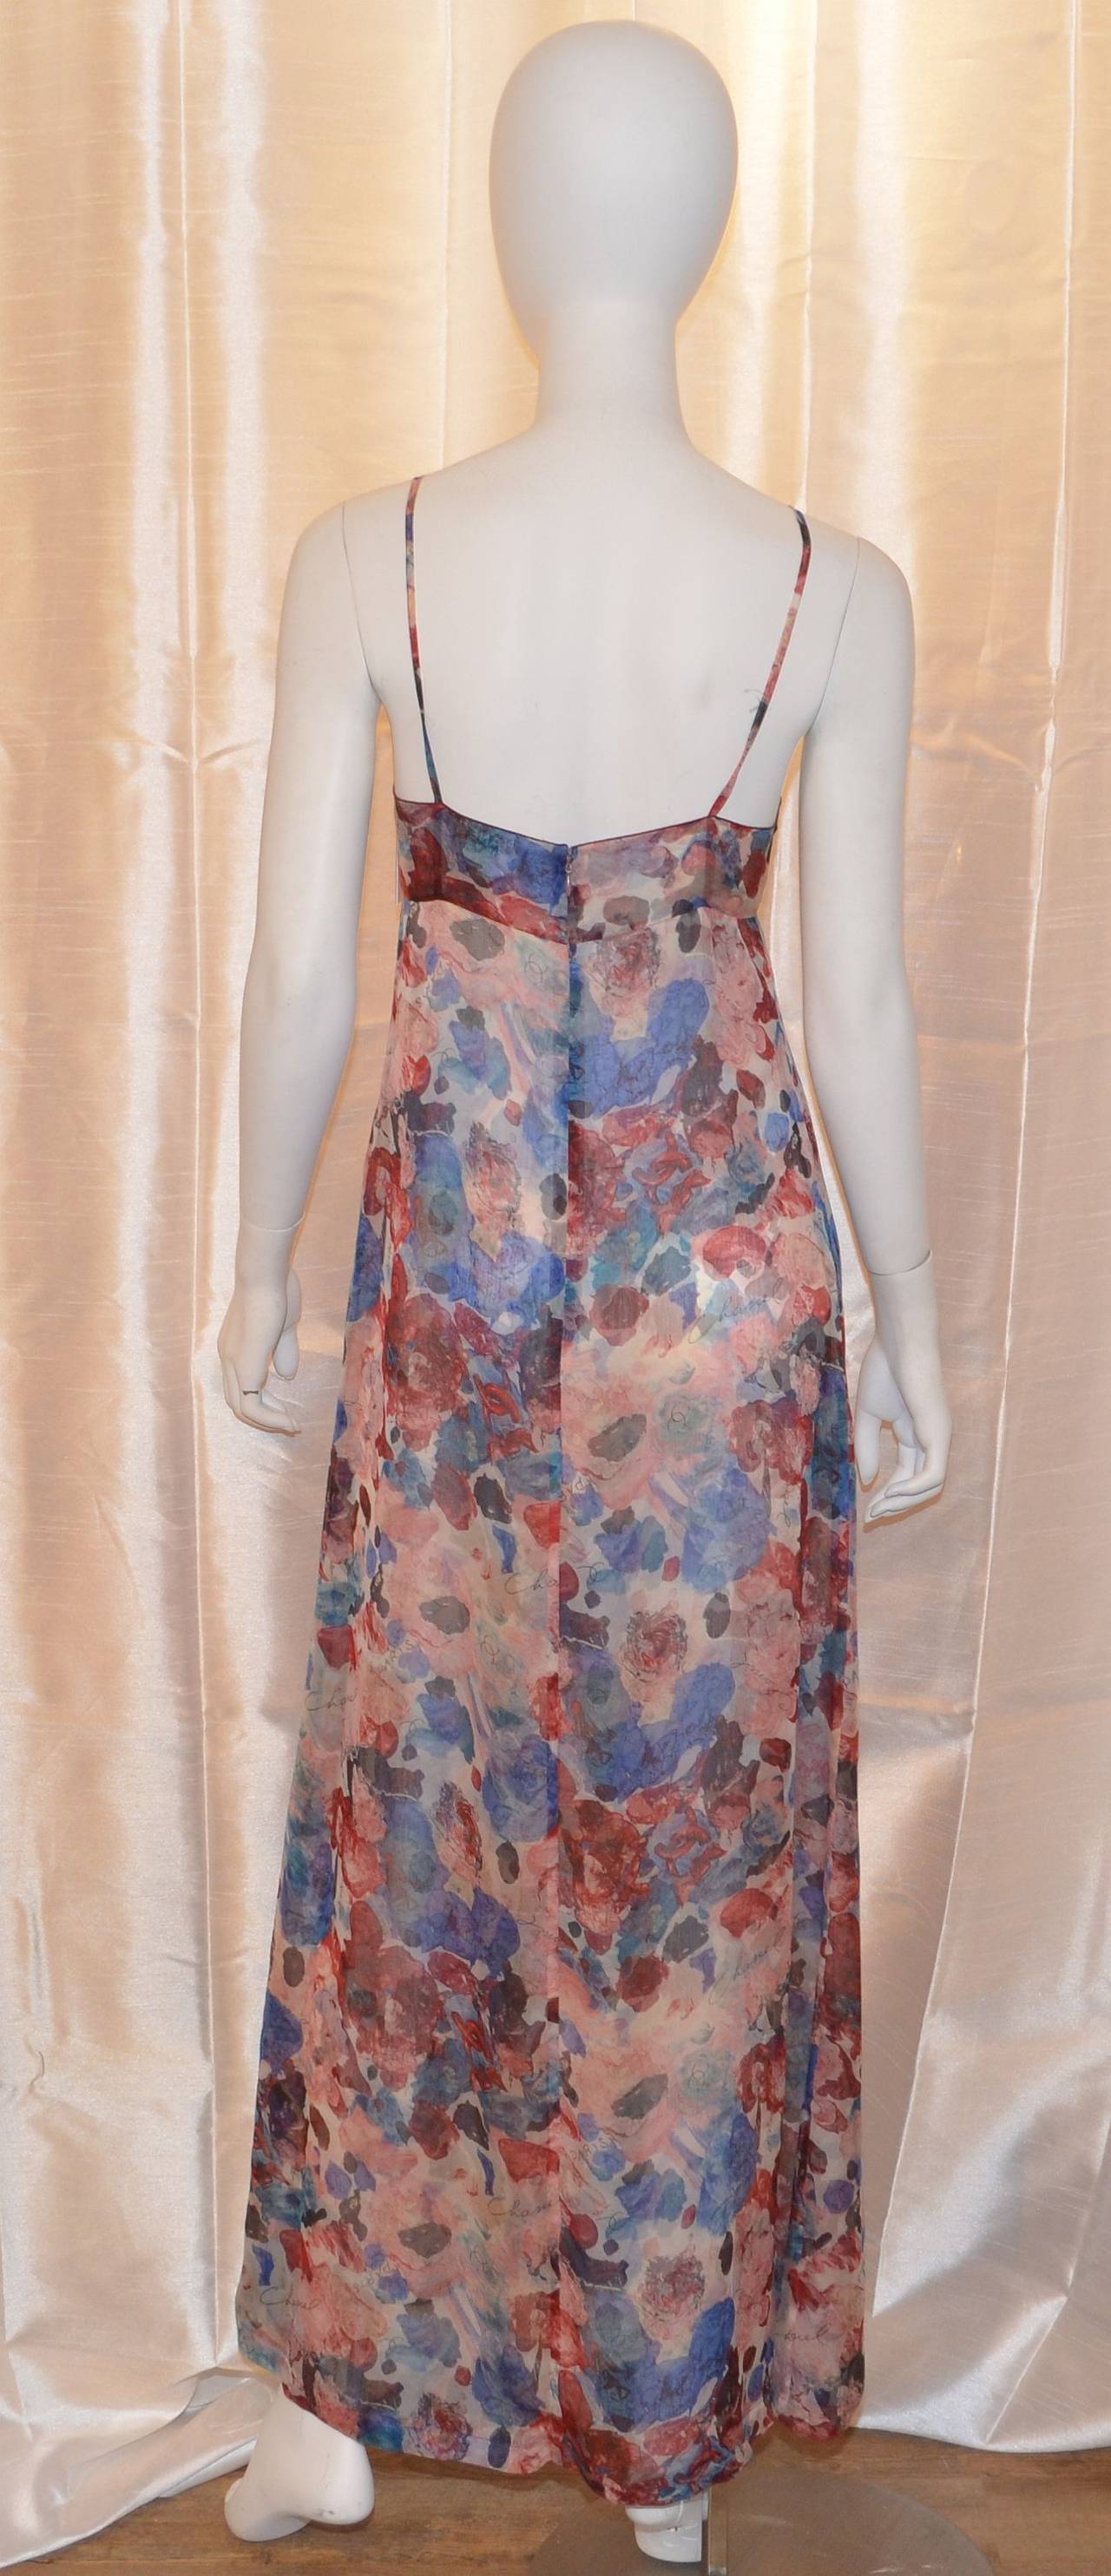 Chanel dress is a size 38 and made in France. There is a back zipper and hook-and-eye fastening, floral print throughout, 100% silk. 

Measurements:
Bust - 32''
Waist - 31''
Hips - 39''
Length - 56.5''